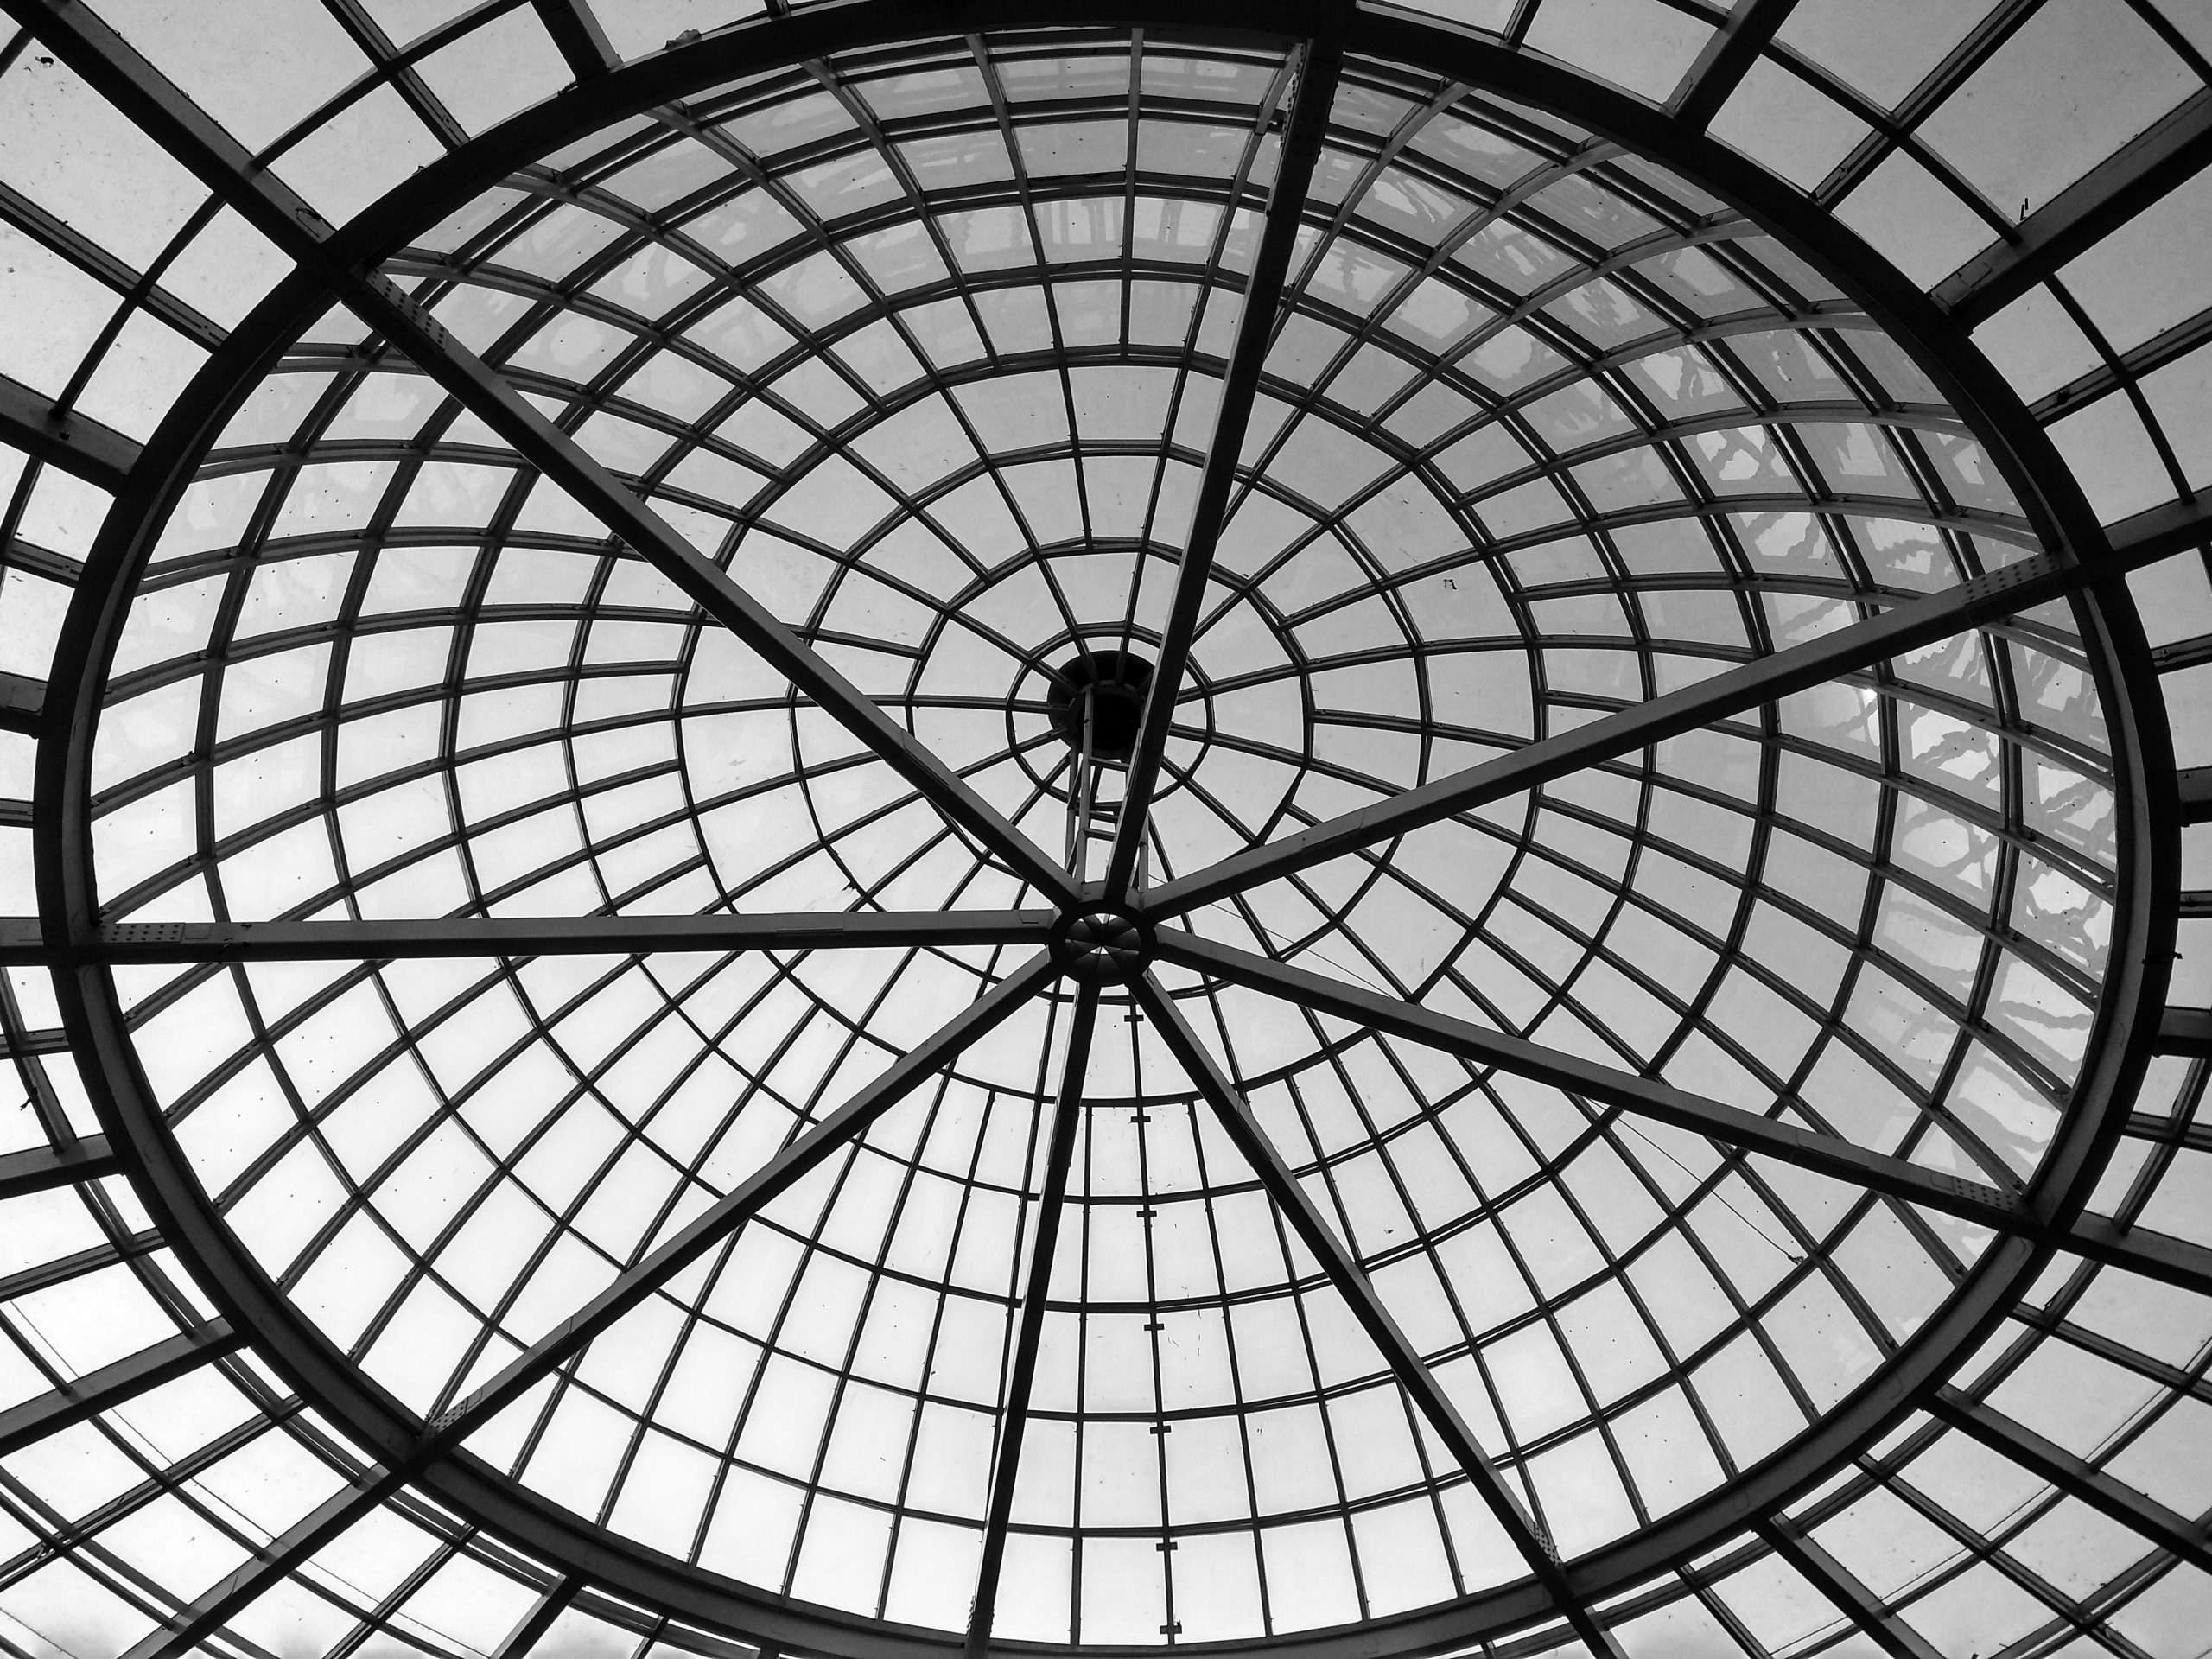 Interior of a dome roof